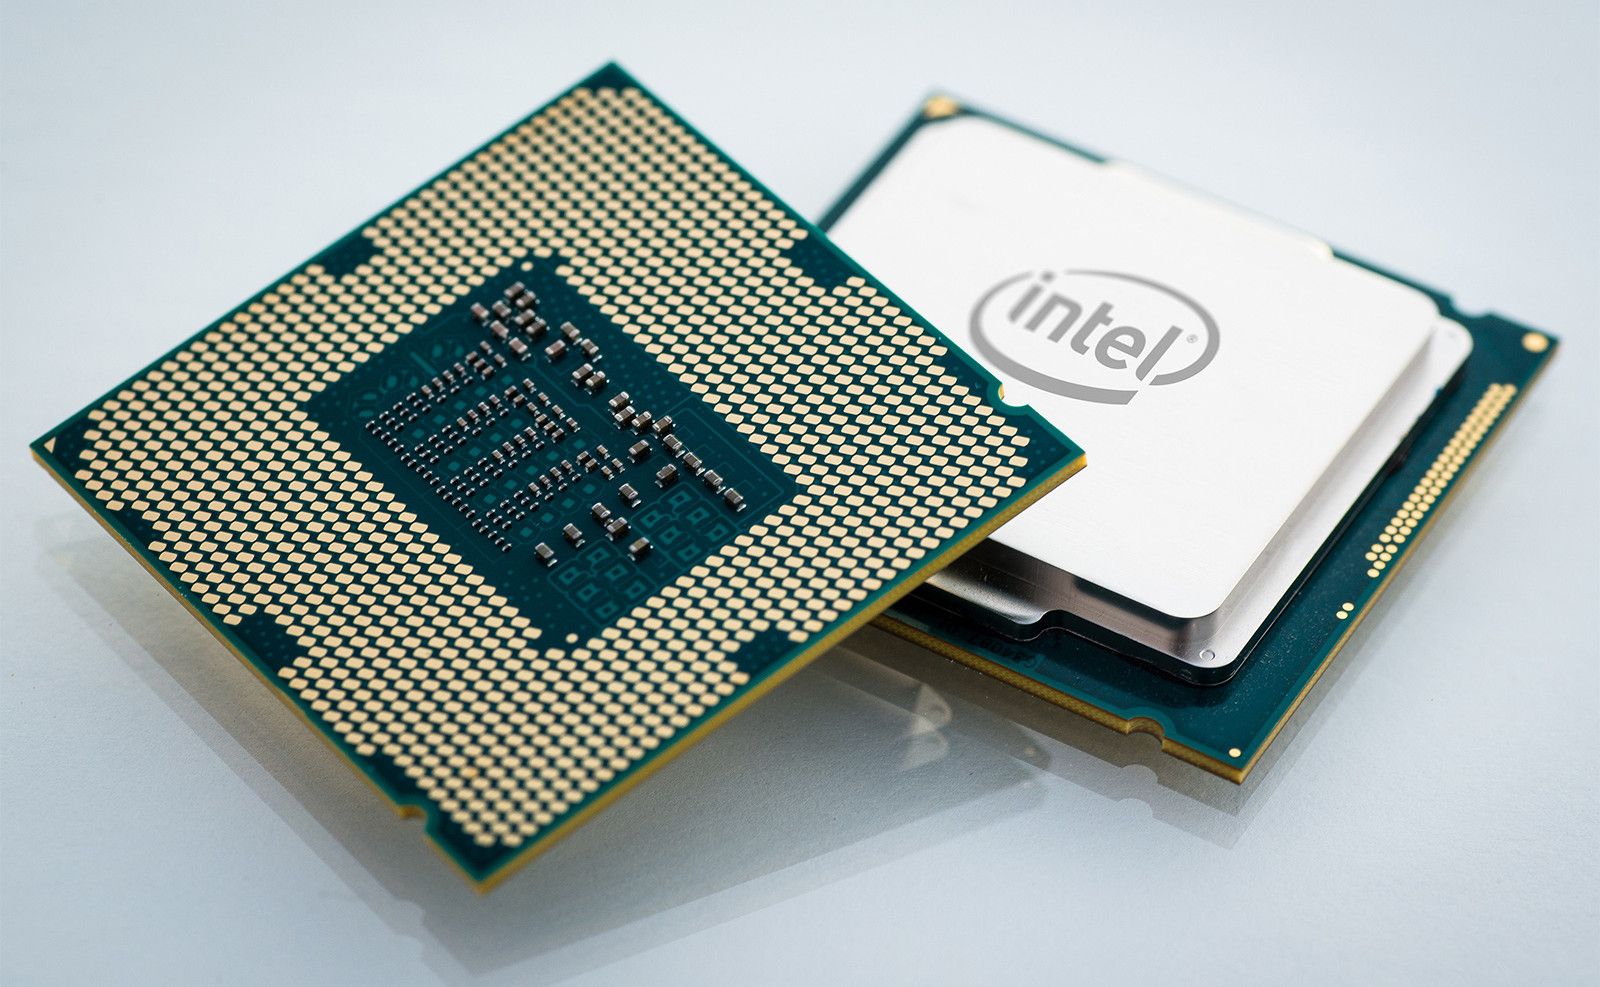 Intel Raptor Lake CPU spotted in first benchmark leak